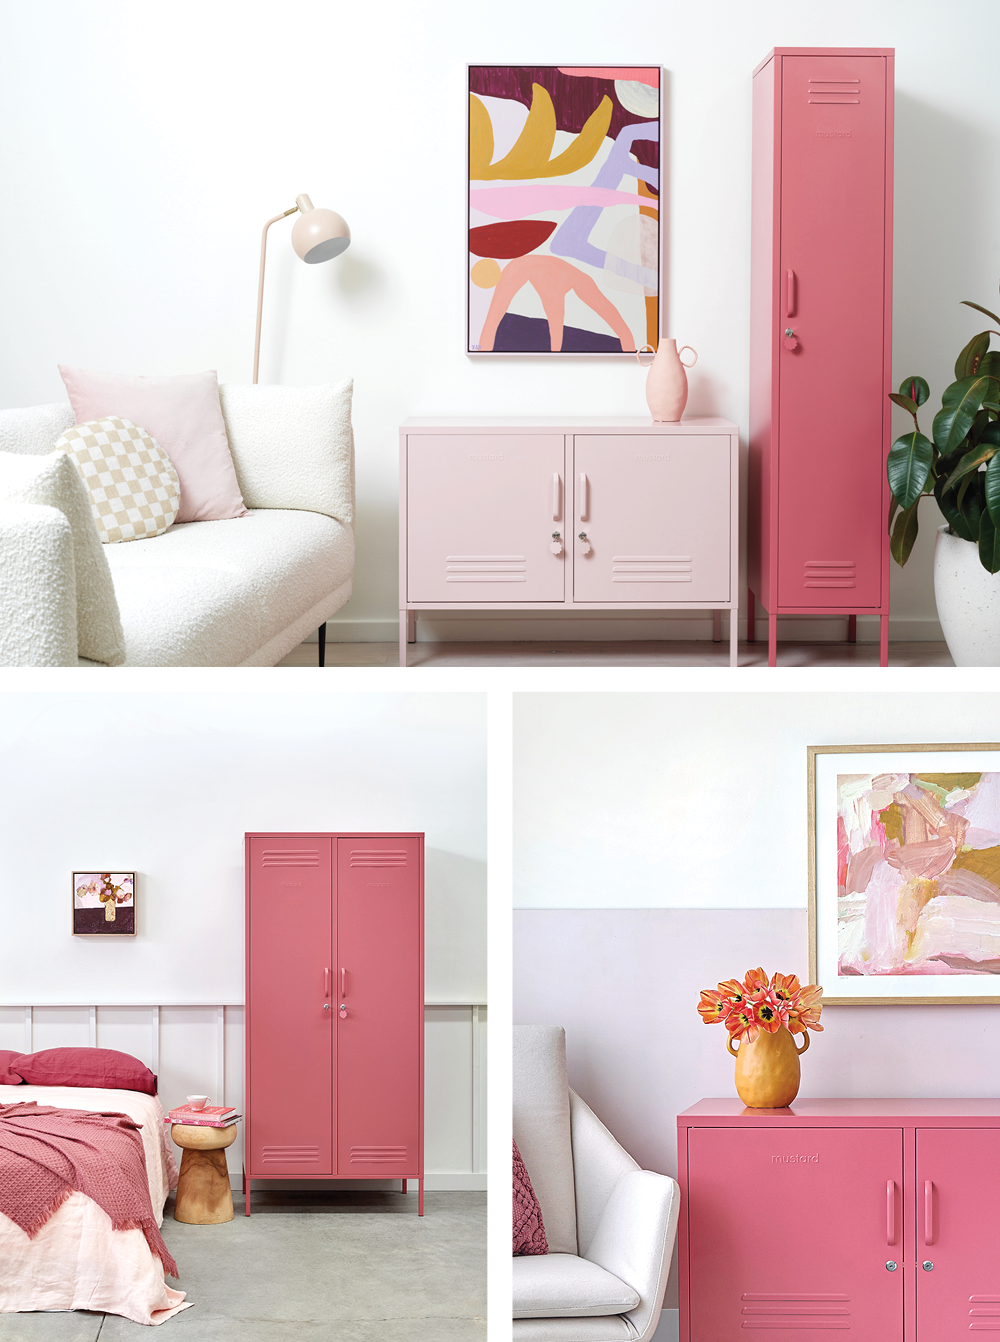 A collection of images showcasing Berry pink lockers used as an accent in otherwise neutral spaces.